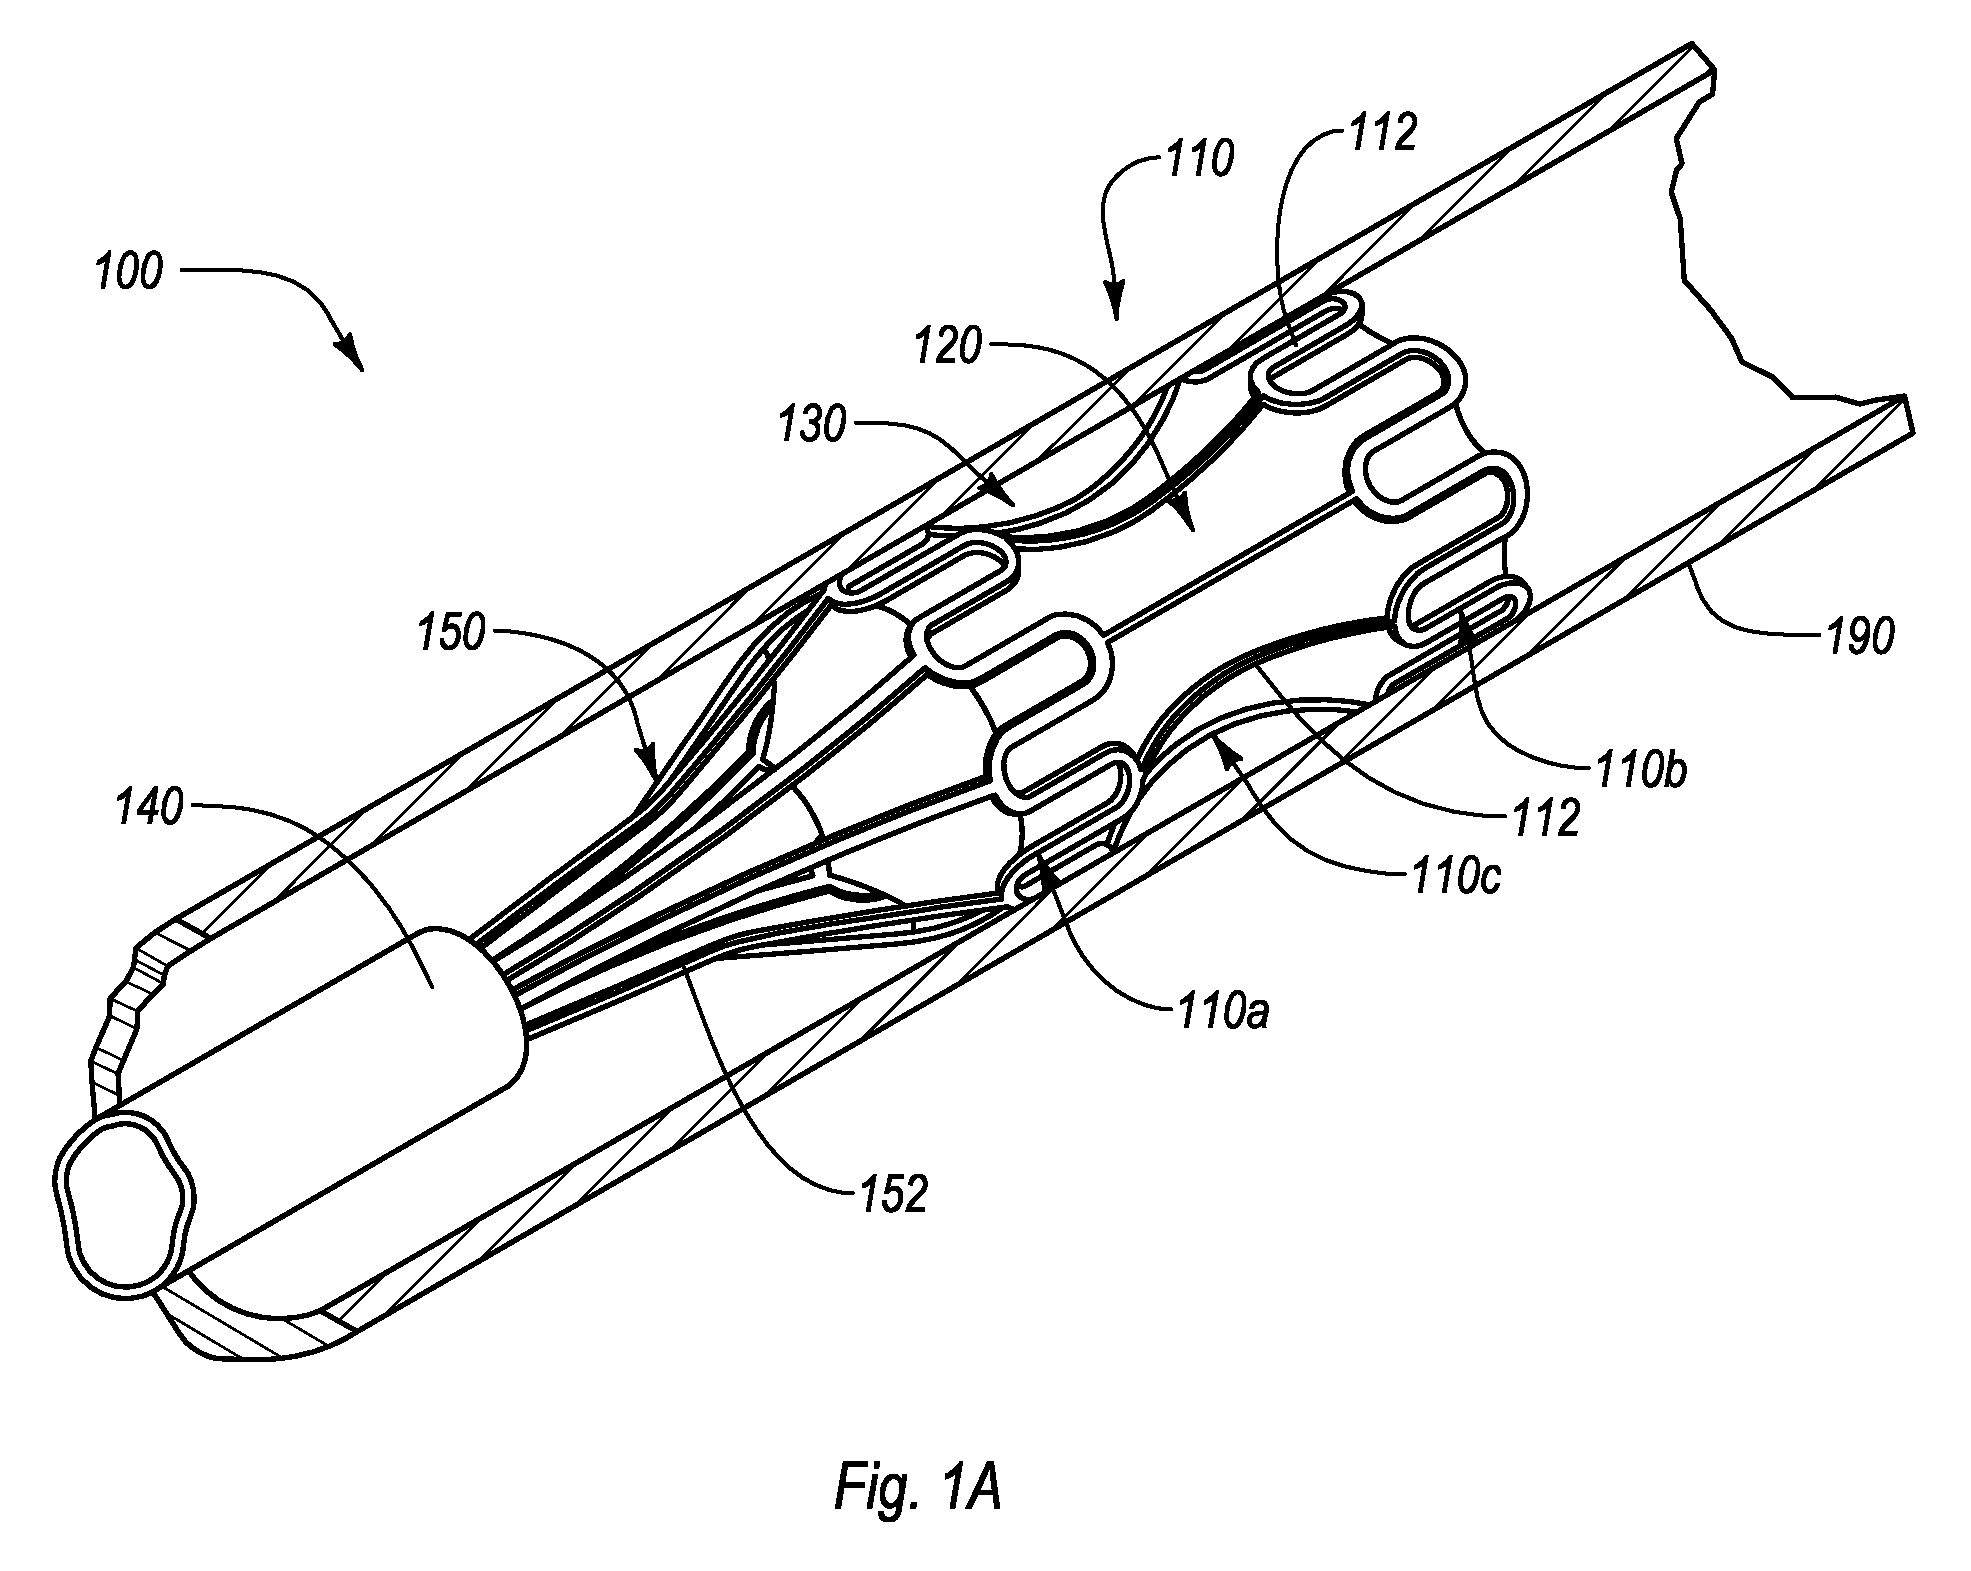 Interluminal medical treatment devices and methods